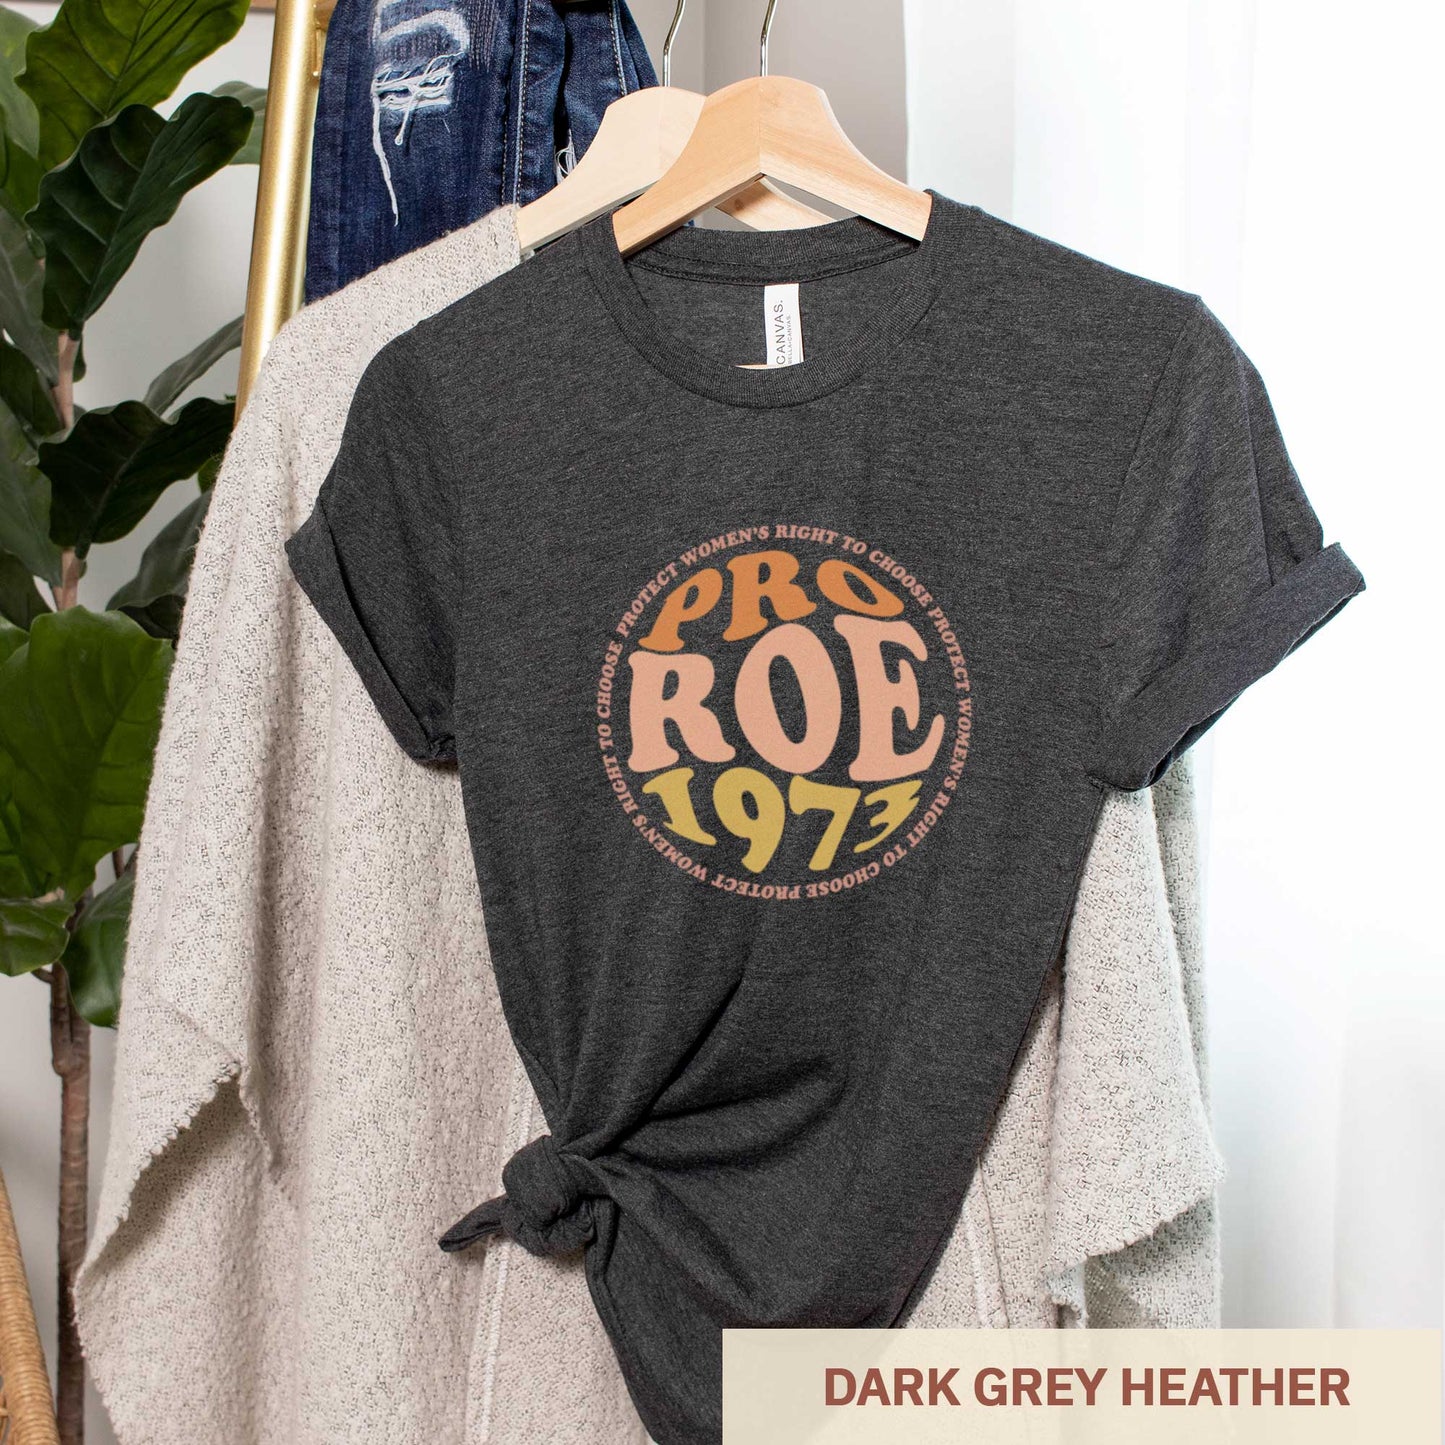 A hanging dark grey heather Bella Canvas t-shirt featuring the words pro roe 1973 in retro font.